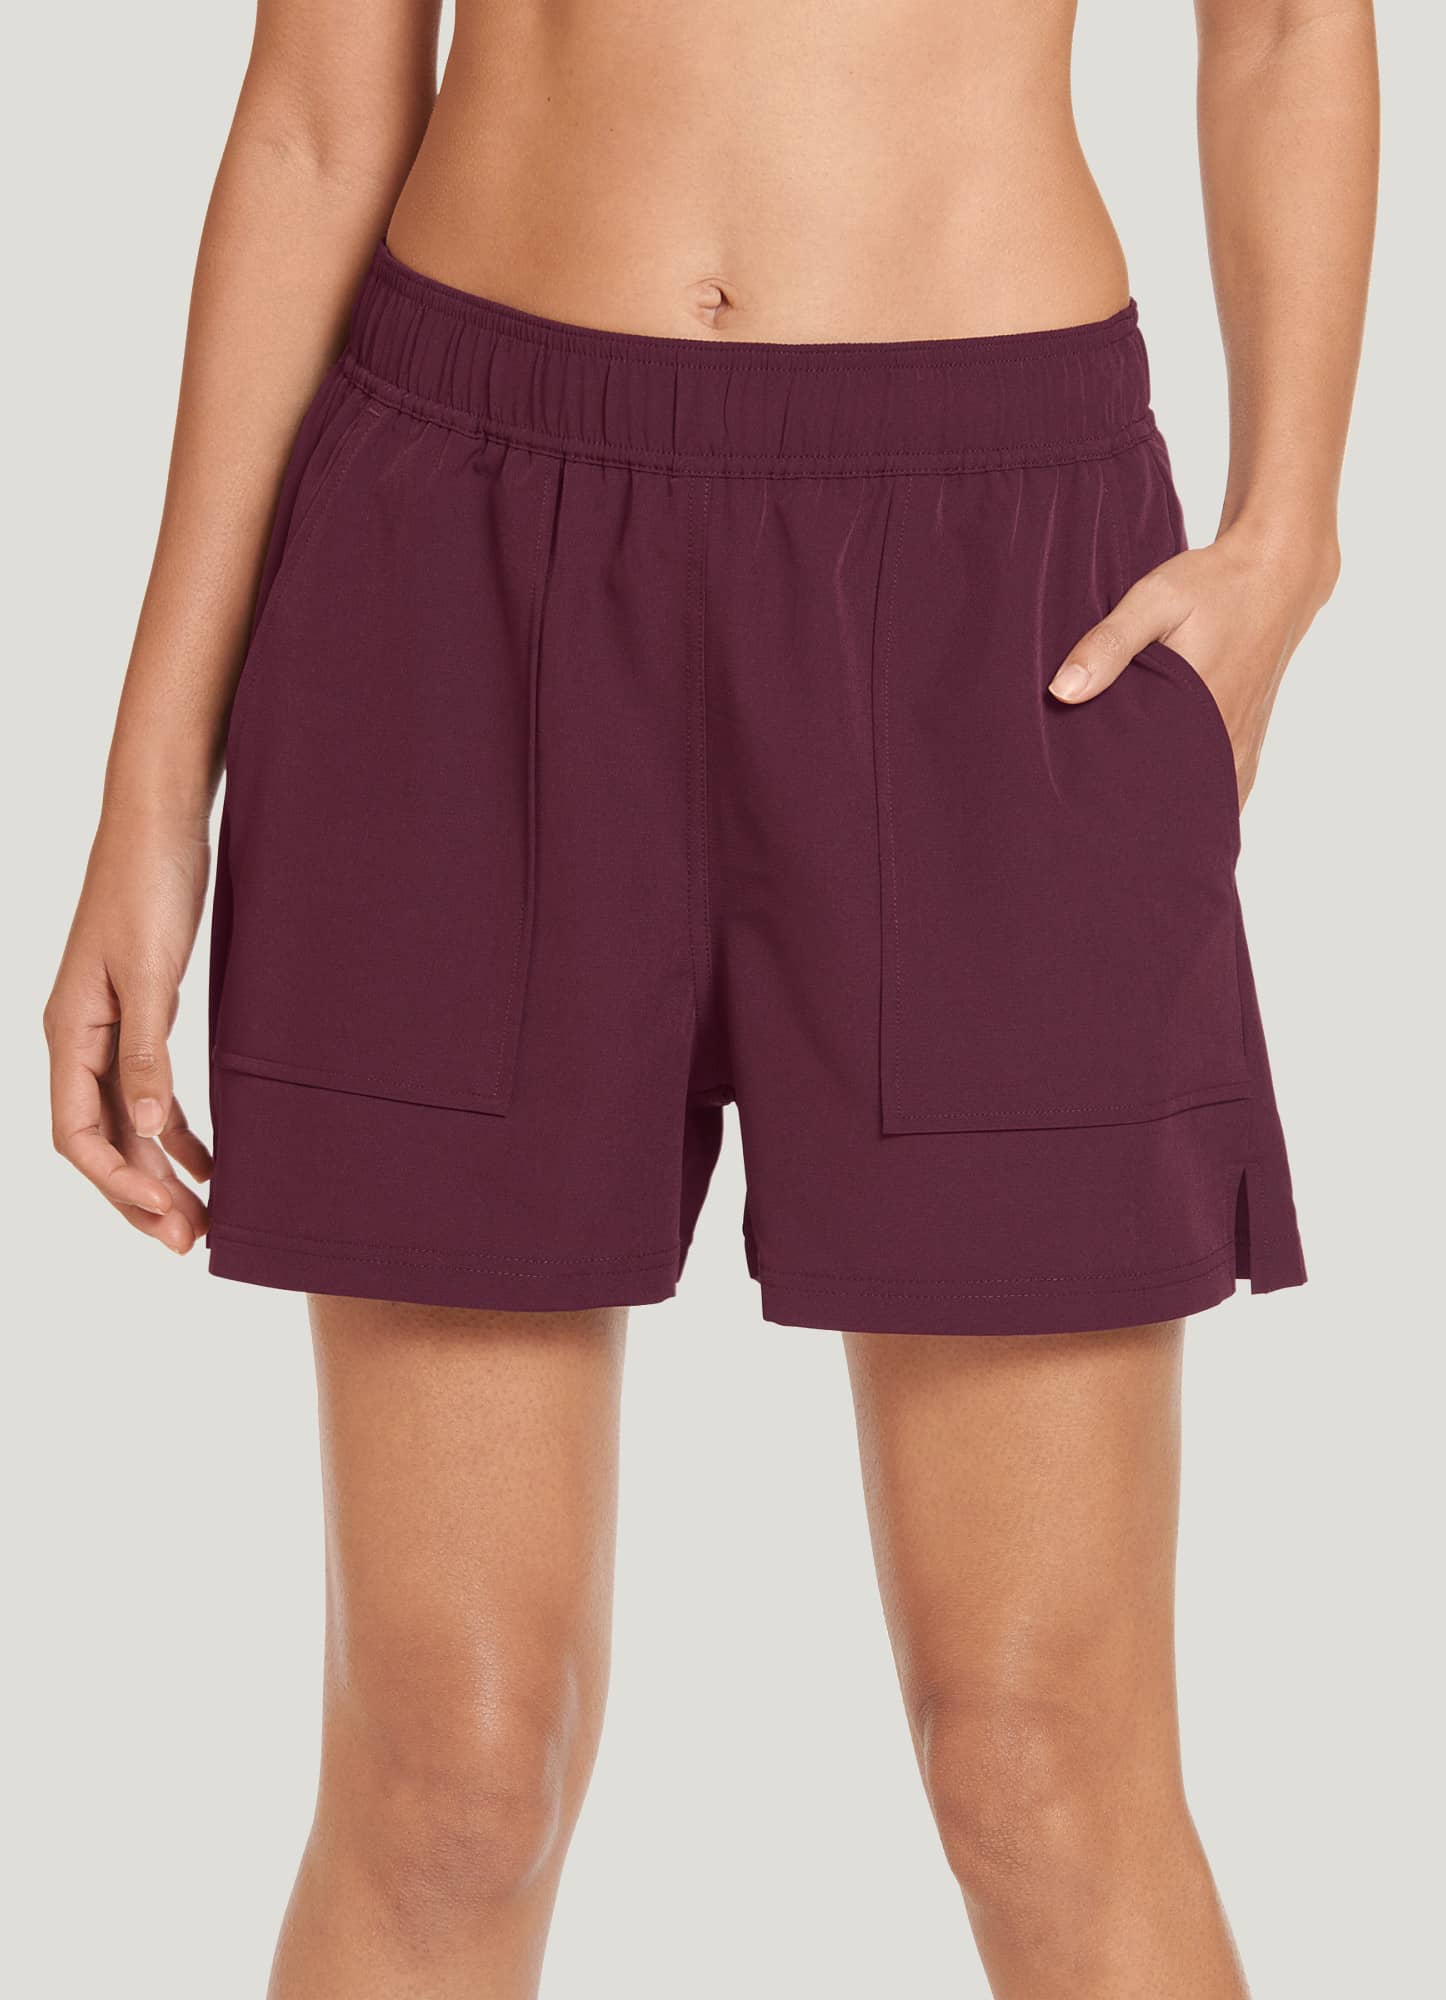 Find more Danskin Now Shorts, Size Large for sale at up to 90% off